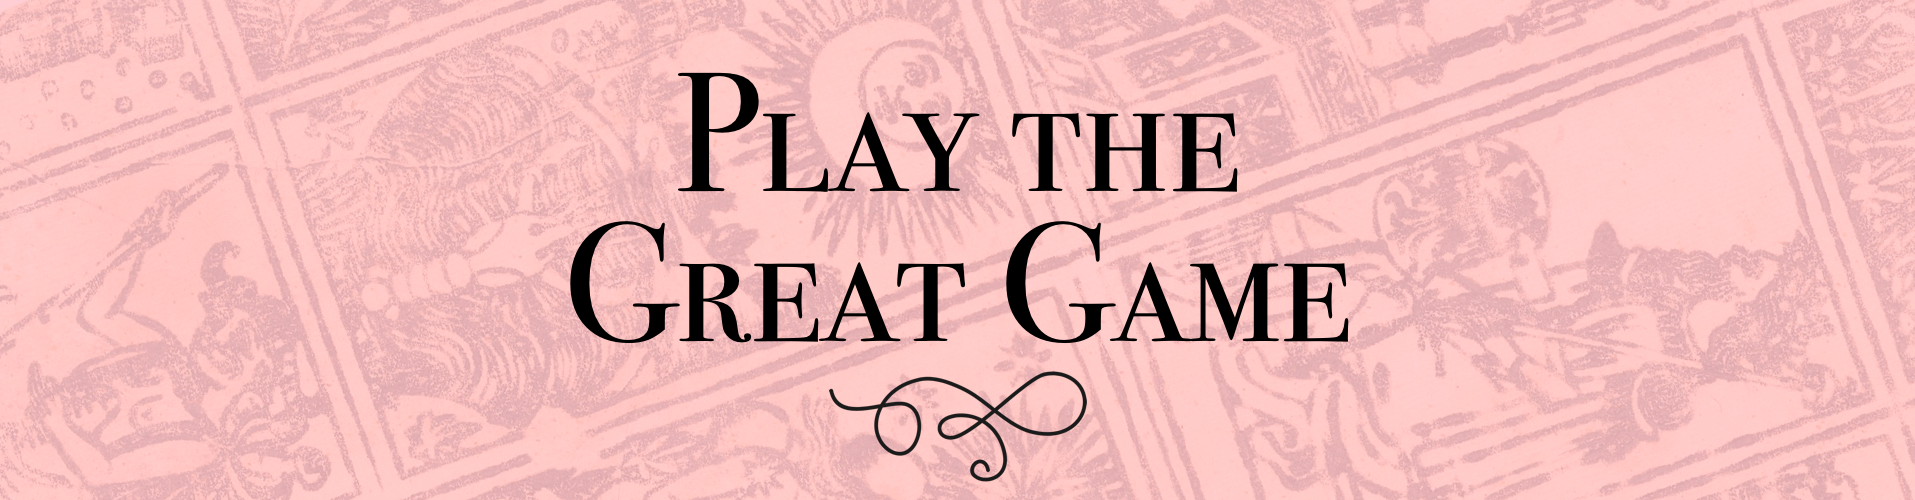 Play the Great Game